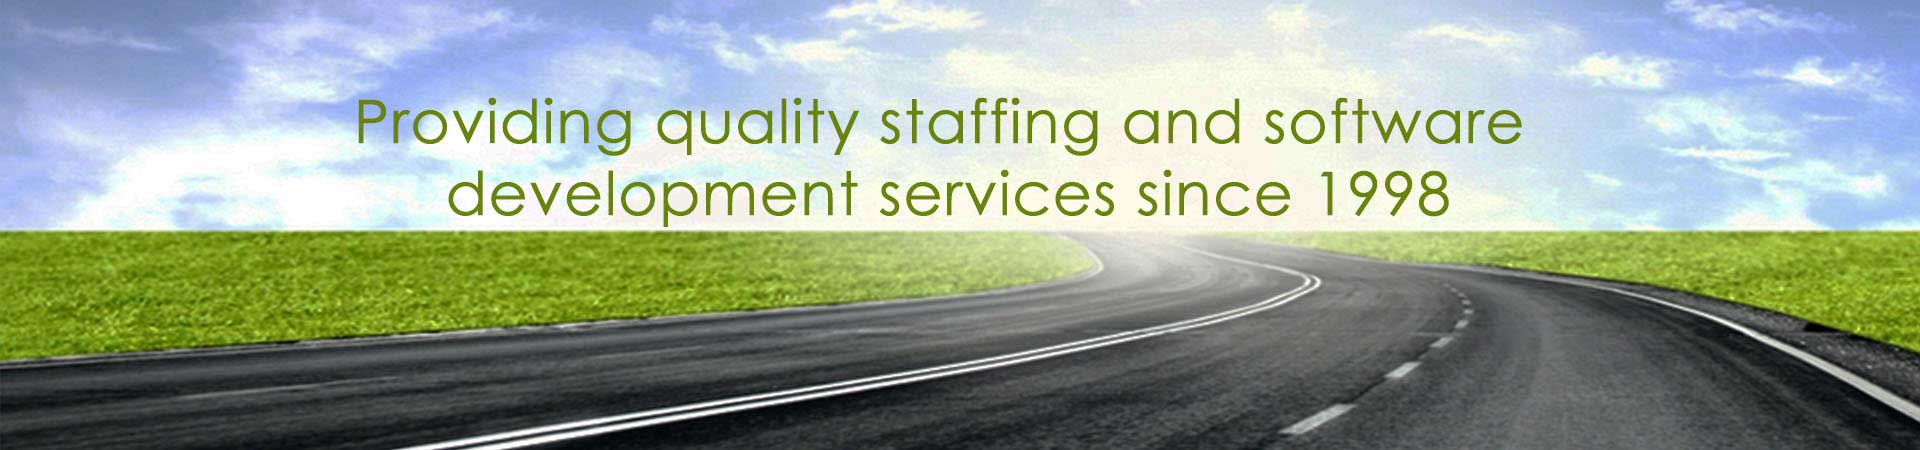 Providing quality staffing and software development service since 1998